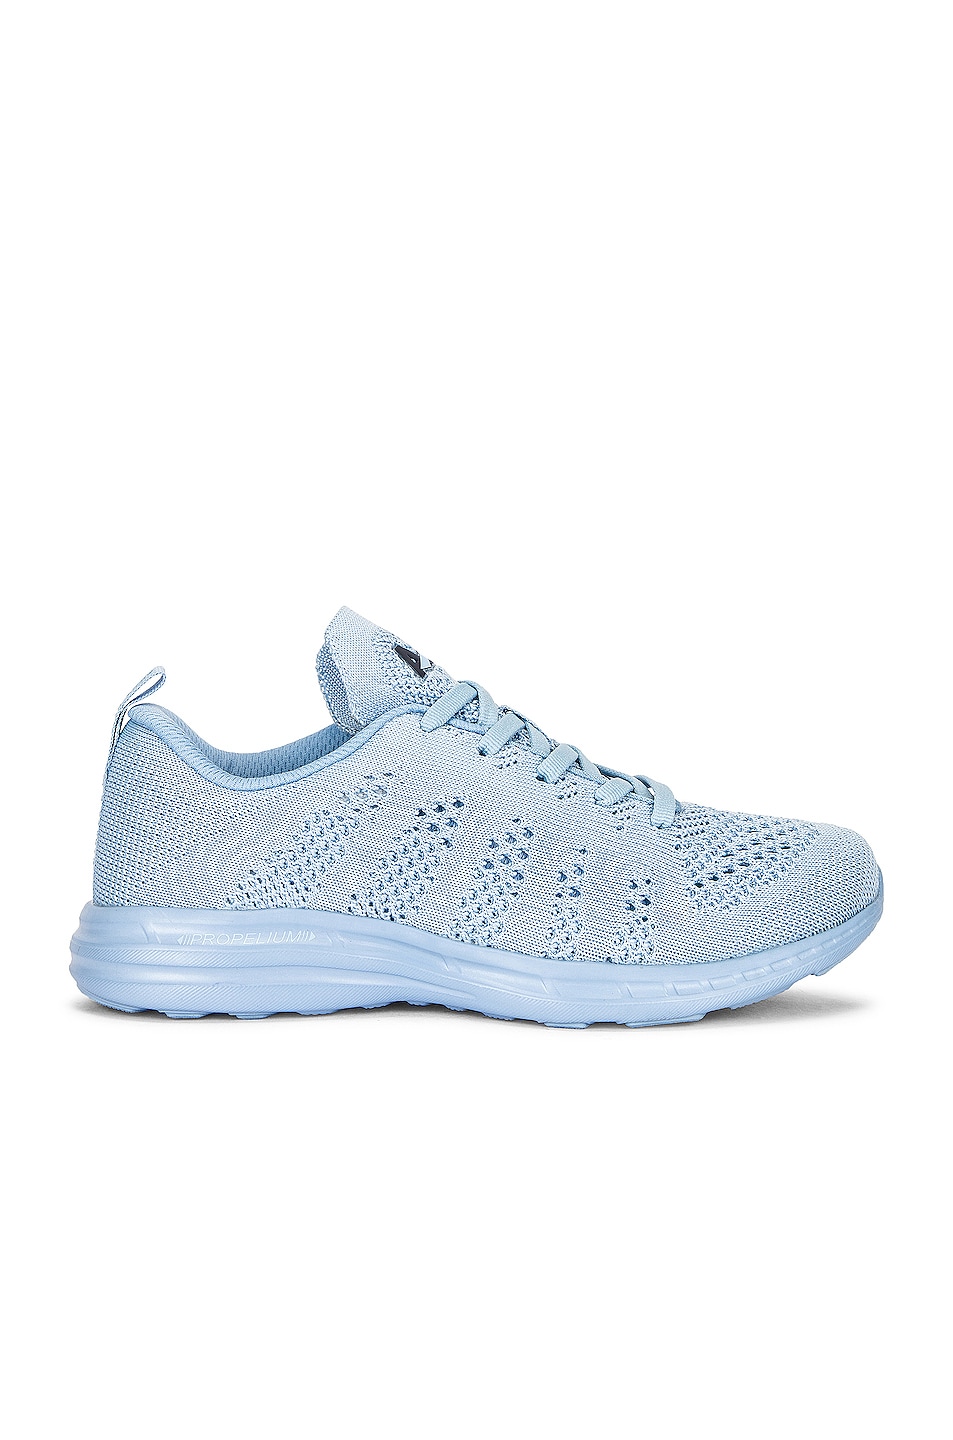 Image 1 of APL: Athletic Propulsion Labs TechLoom Pro Sneaker in Ice Blue & Midnight